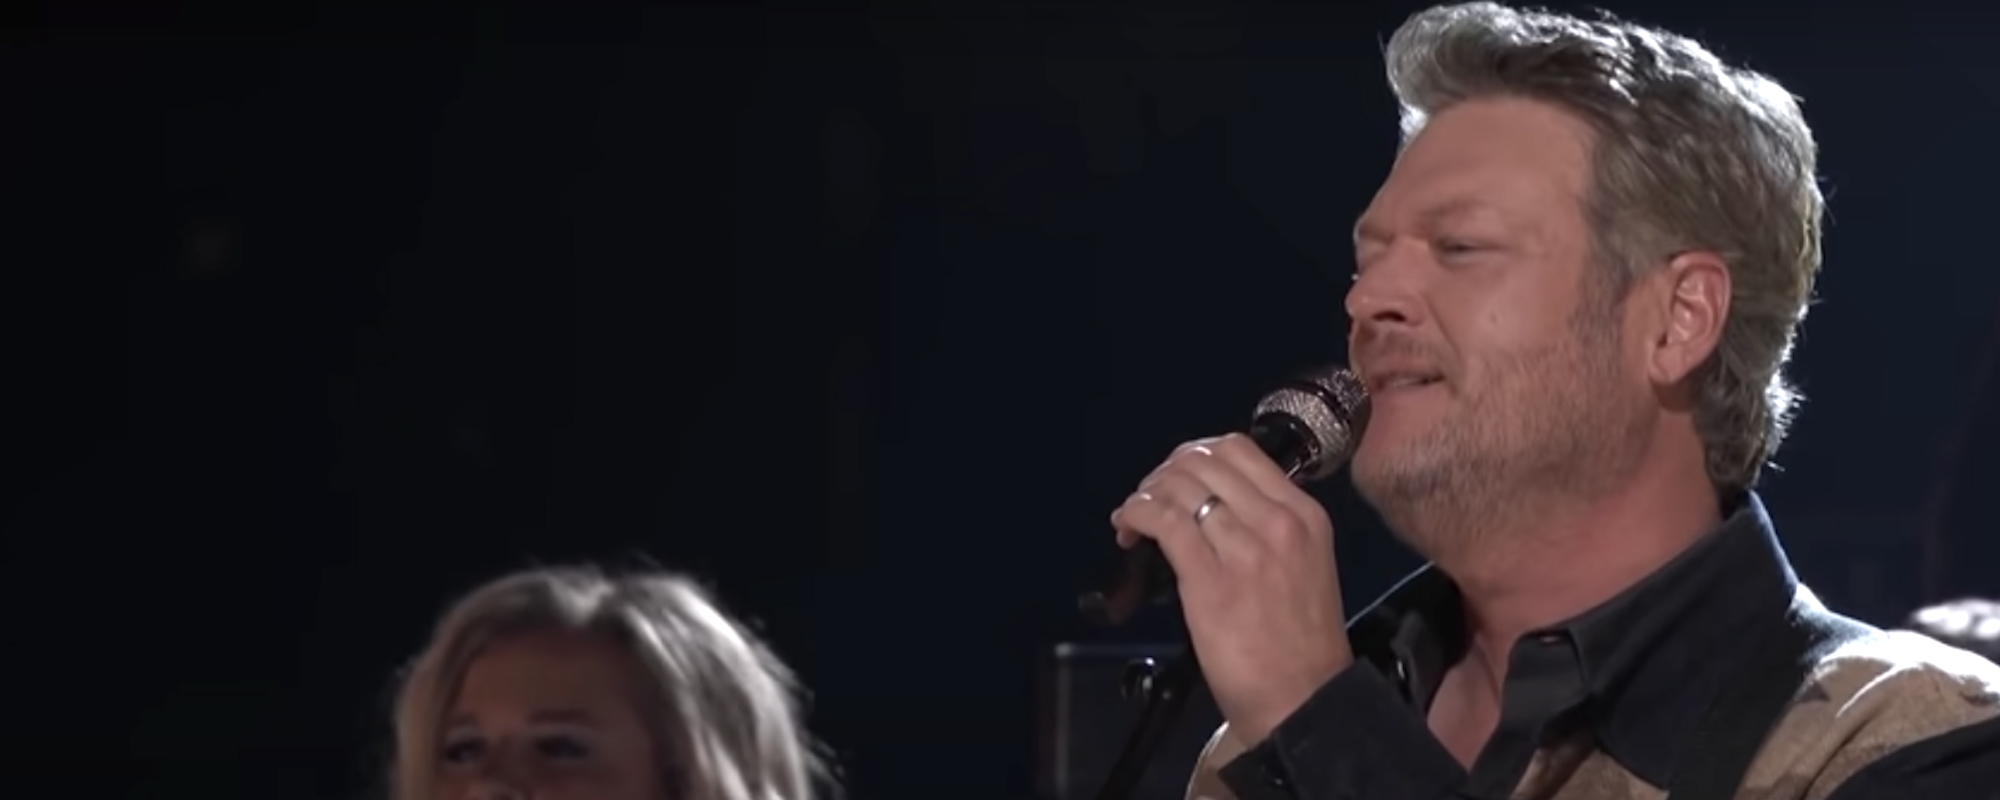 Blake Shelton Adds Blazing Performance of “Come Back as a Country Boy” on ‘The Voice’